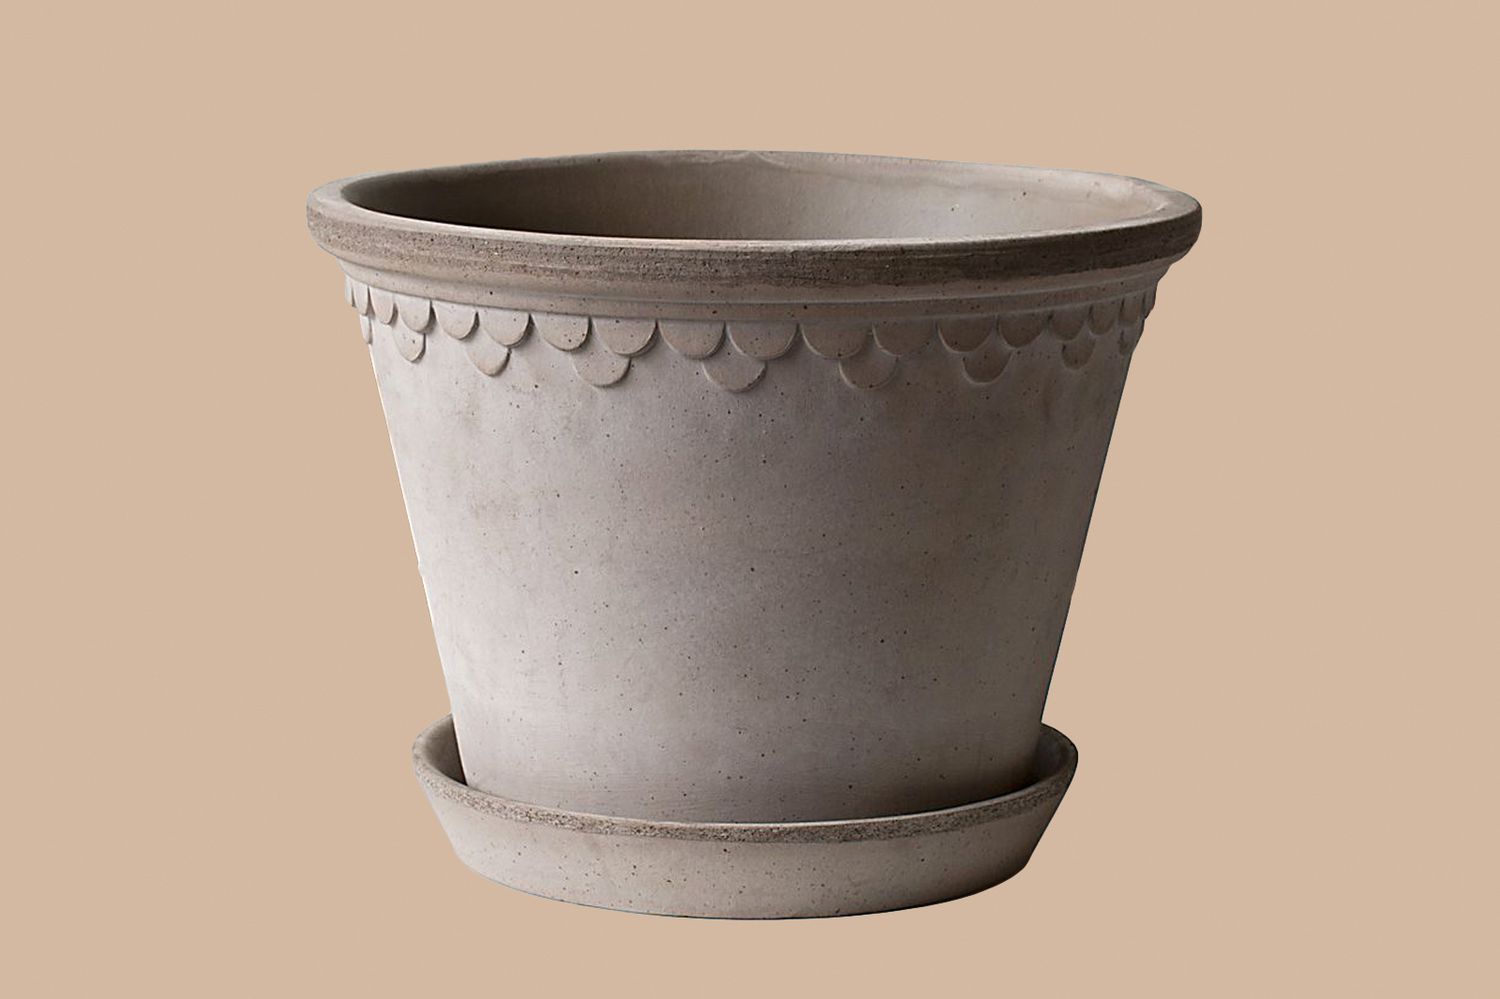 Planter on solid background